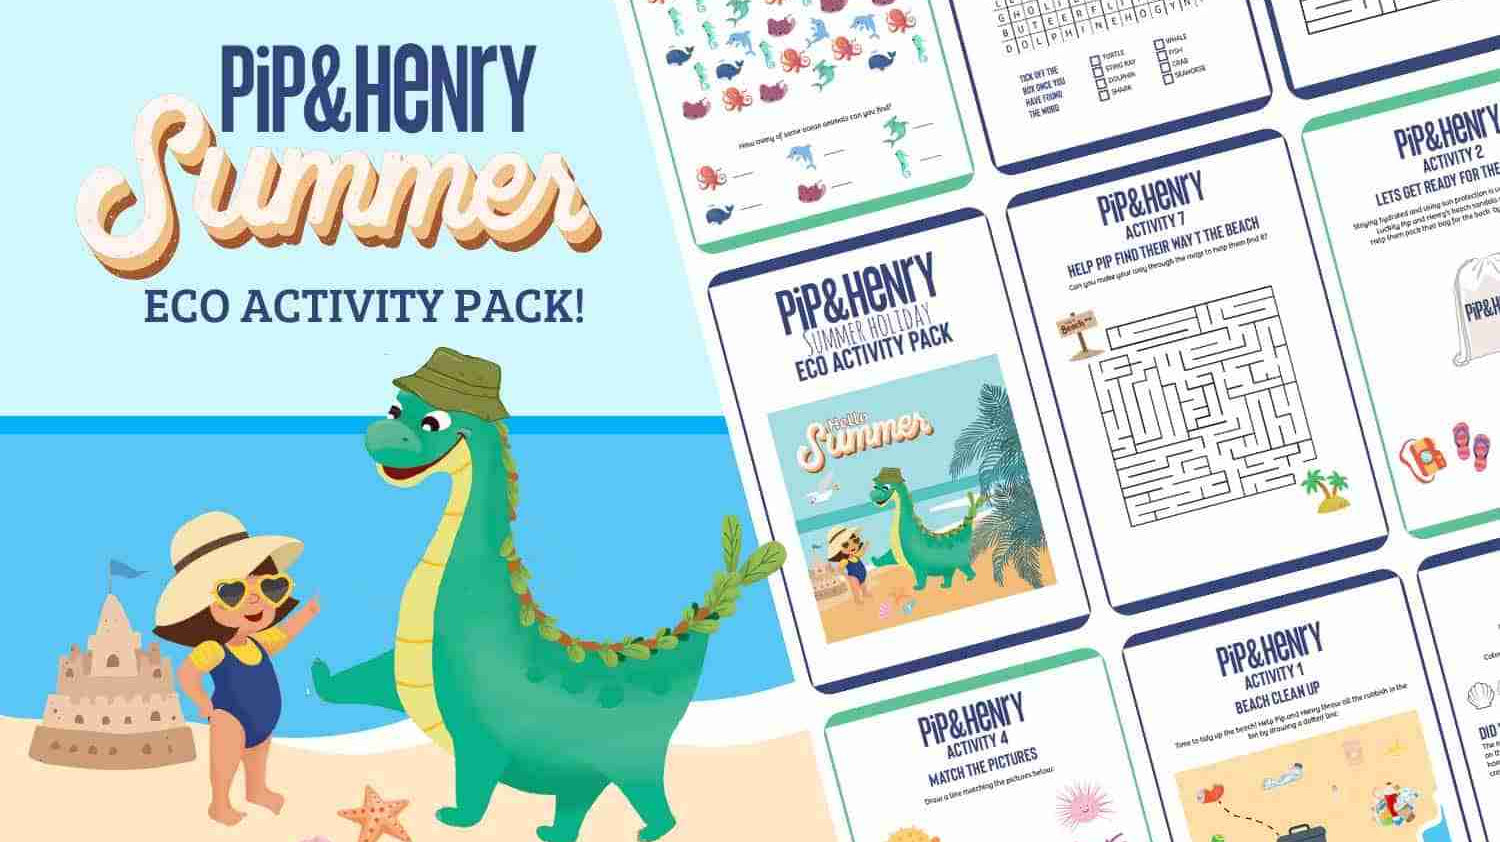 Your Summer Eco Activity Pack Is Here!